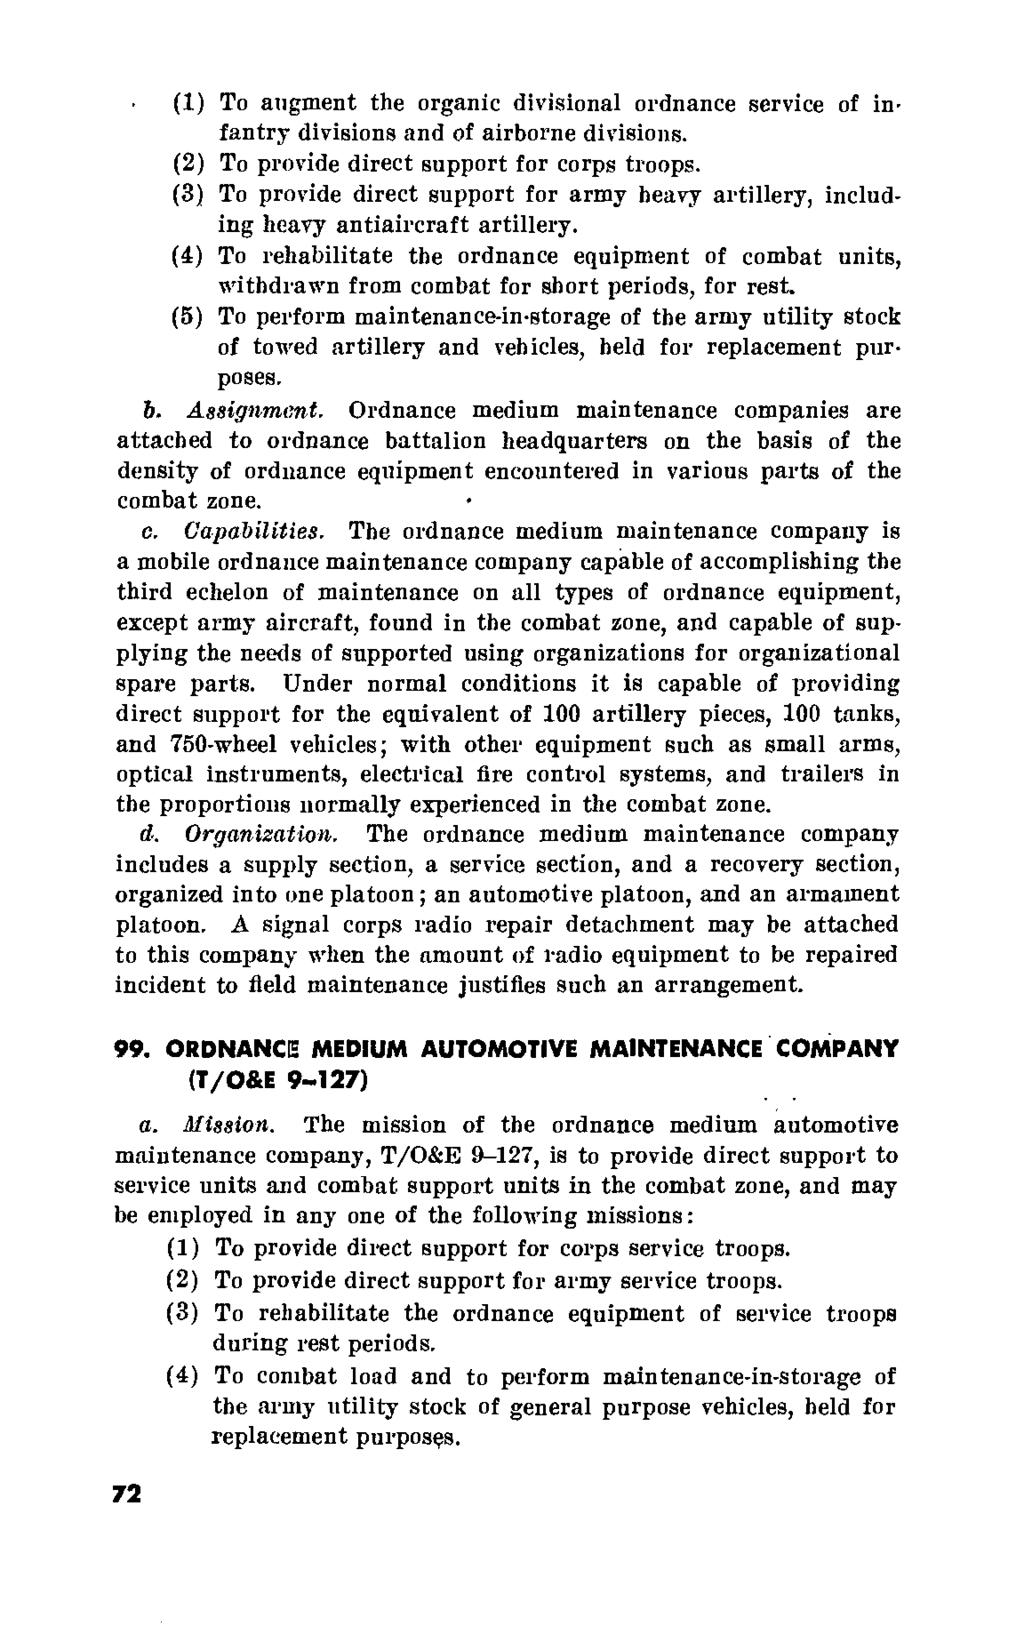 (1) To augment the organic divisional ordnance service of in. fantry divisions and of airborne divisions. (2) To provide direct support for corps troops.